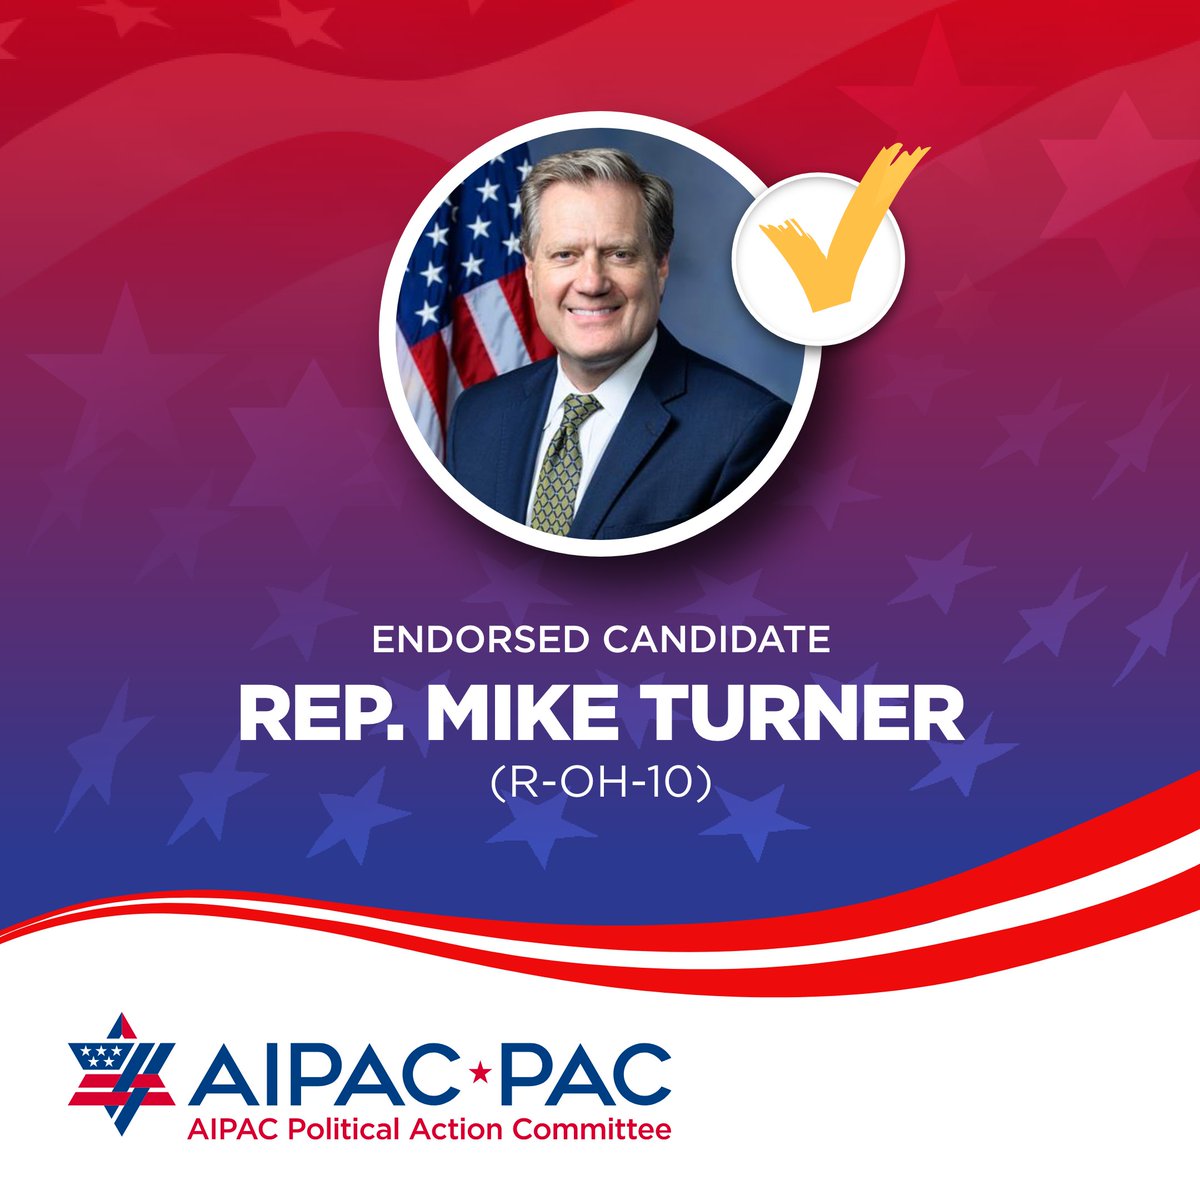 Congratulations to AIPAC-endorsed @RepMikeCarey and @RepMikeTurner on your primary election victories! AIPAC is proud to stand with pro-Israel candidates who help strengthen and expand the U.S.-Israel relationship. Being pro-Israel is good policy and good politics.